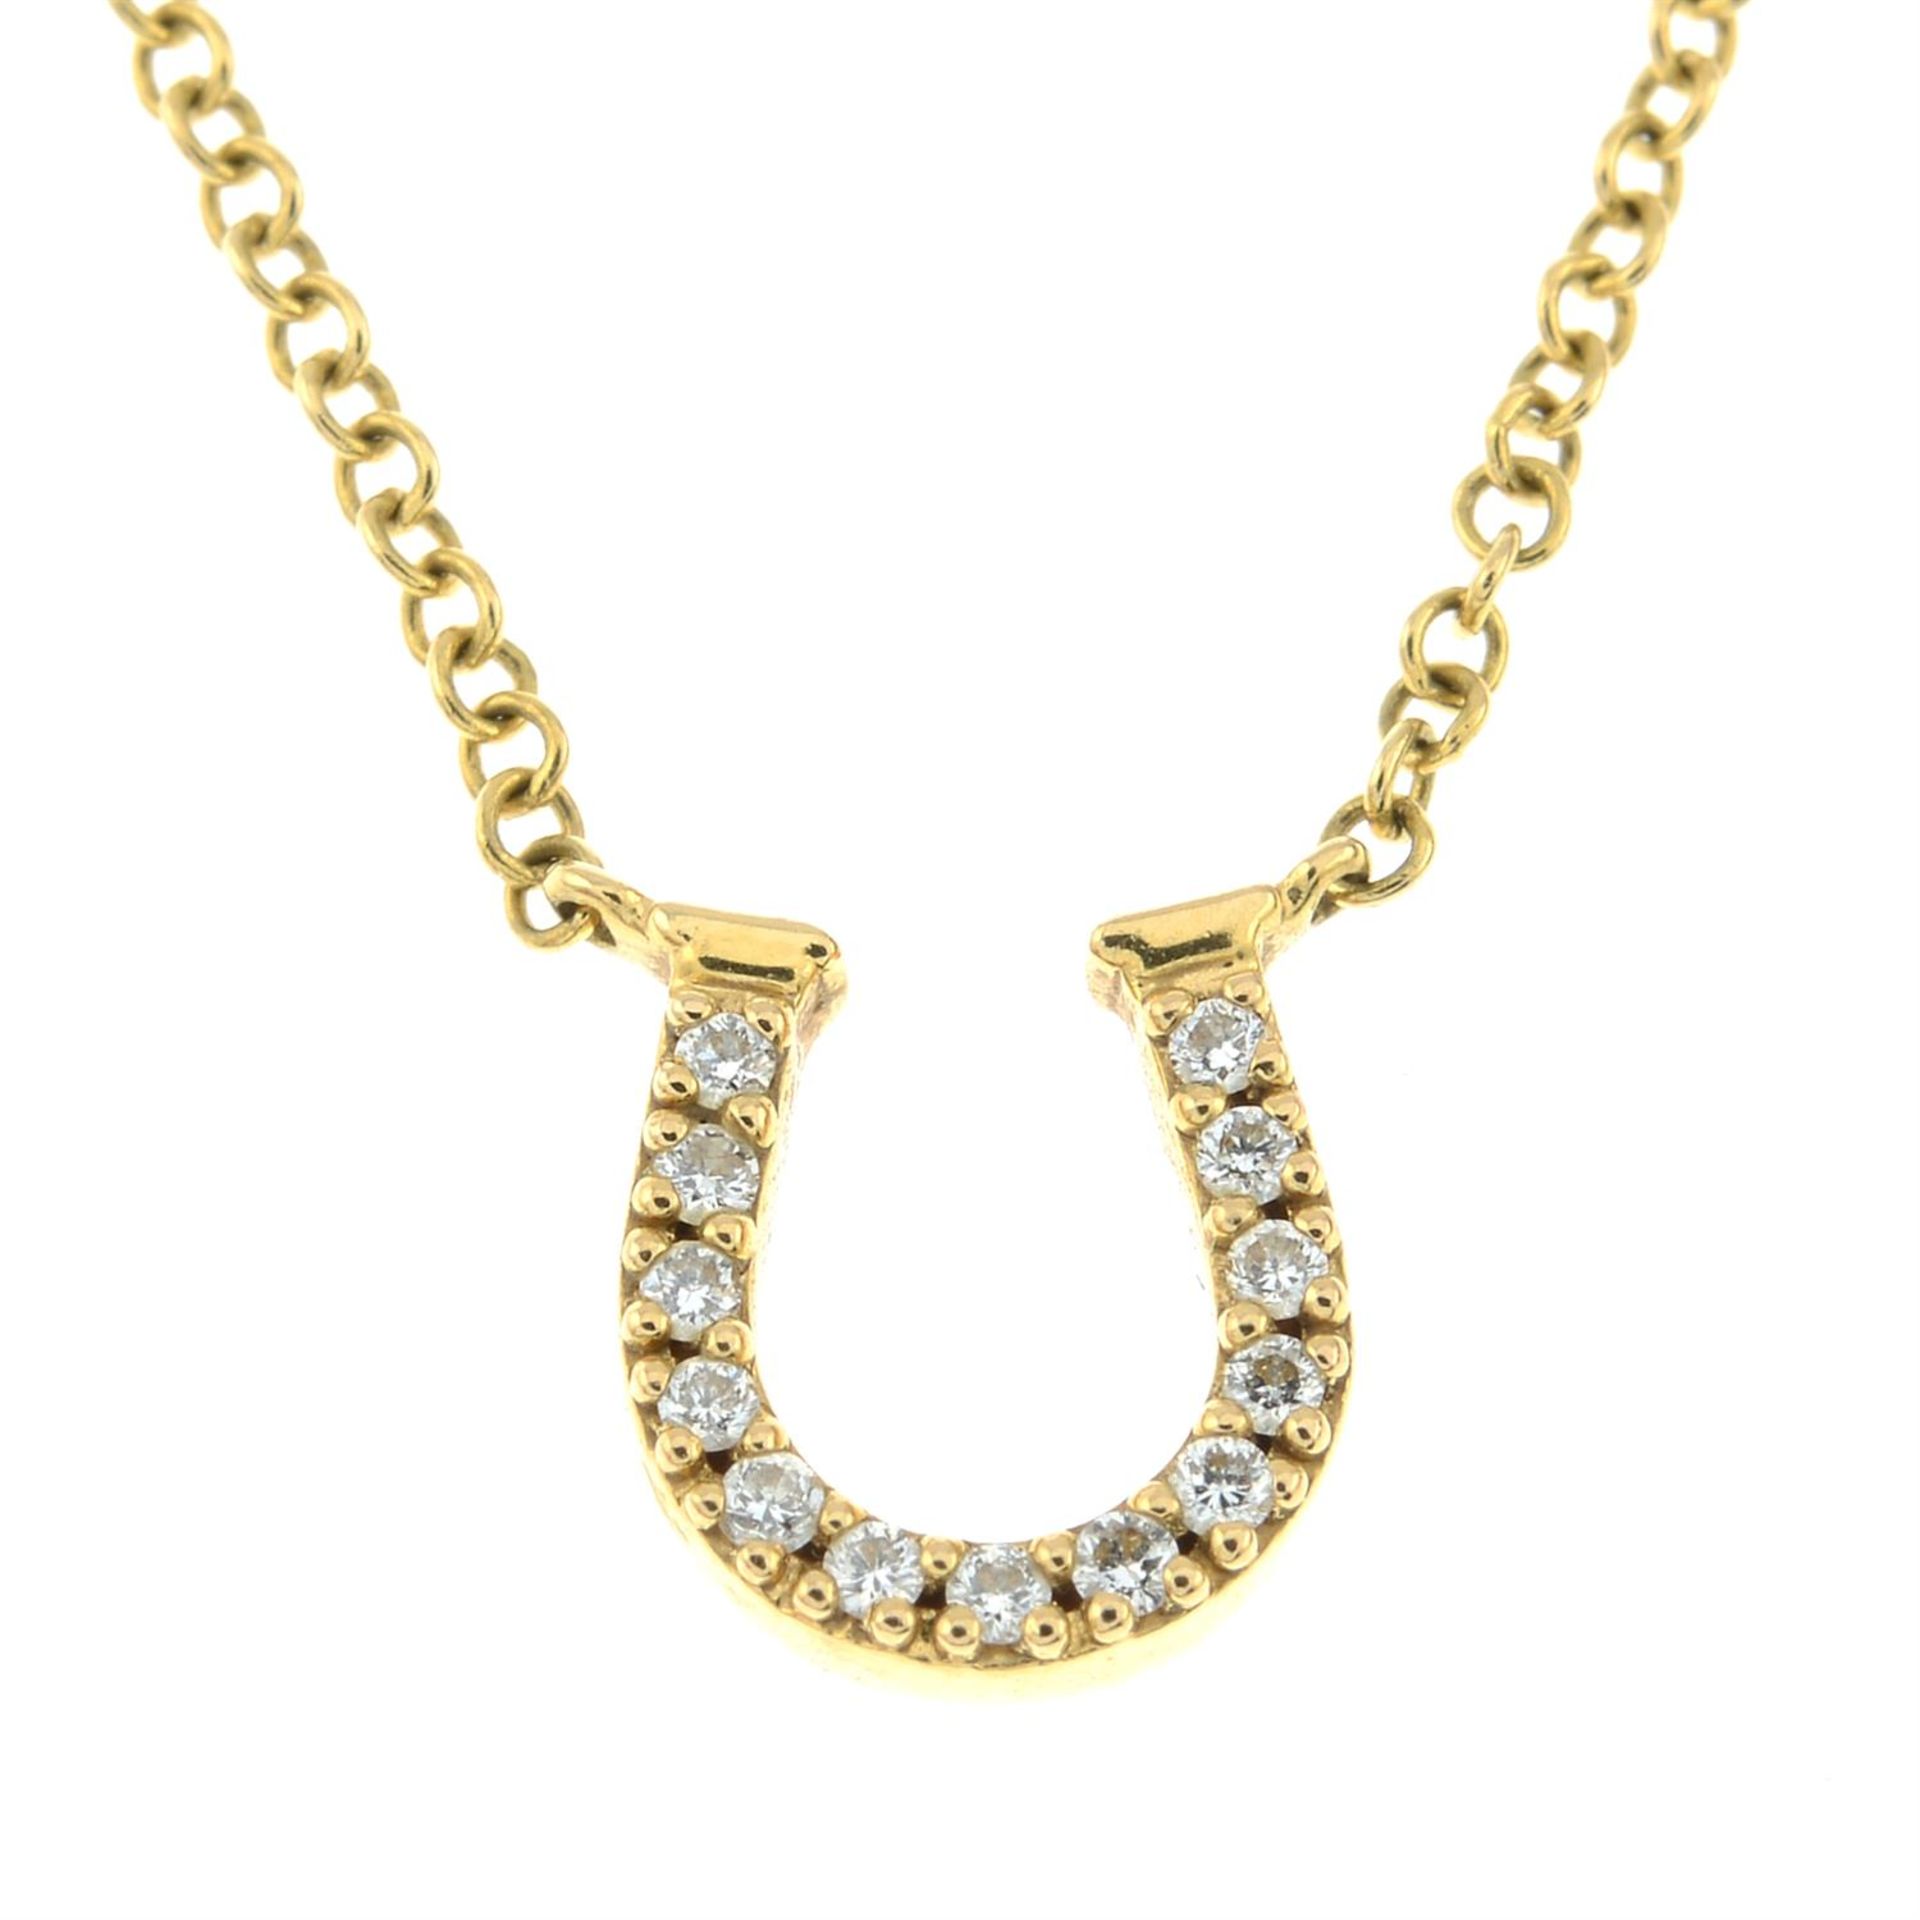 A diamond horseshoe pendant, on an integral trace-link chain, by Tiffany & Co.